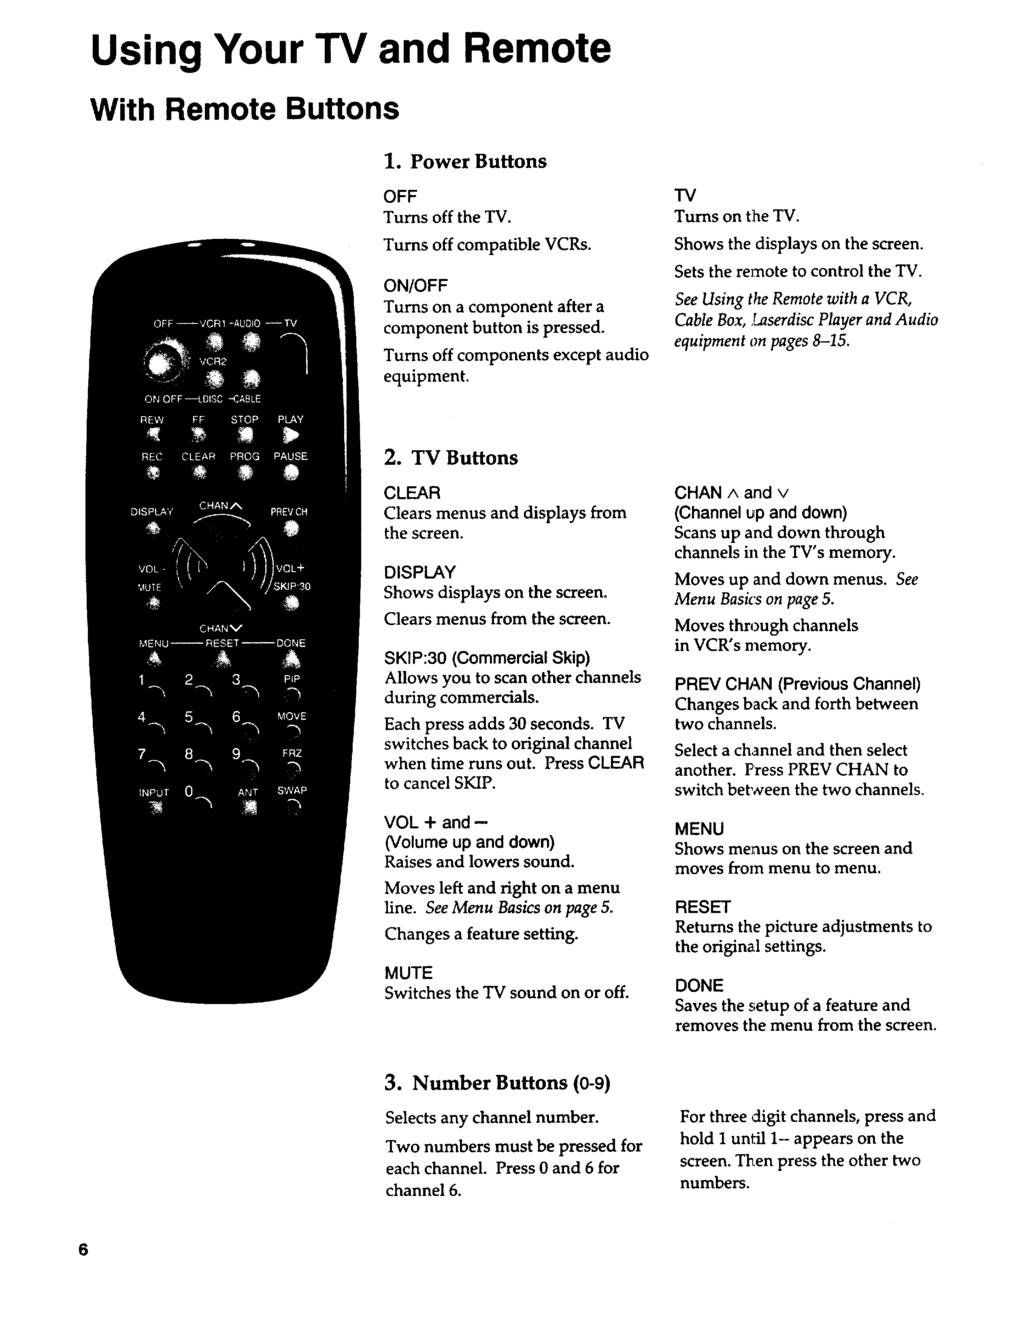 Using Your TV and Remote With Remote Buttons 1. Power Buttons OFF Turns off the TV. Turns off compatible VCRs. ON/OFF Turns on a component after a component button is pressed.